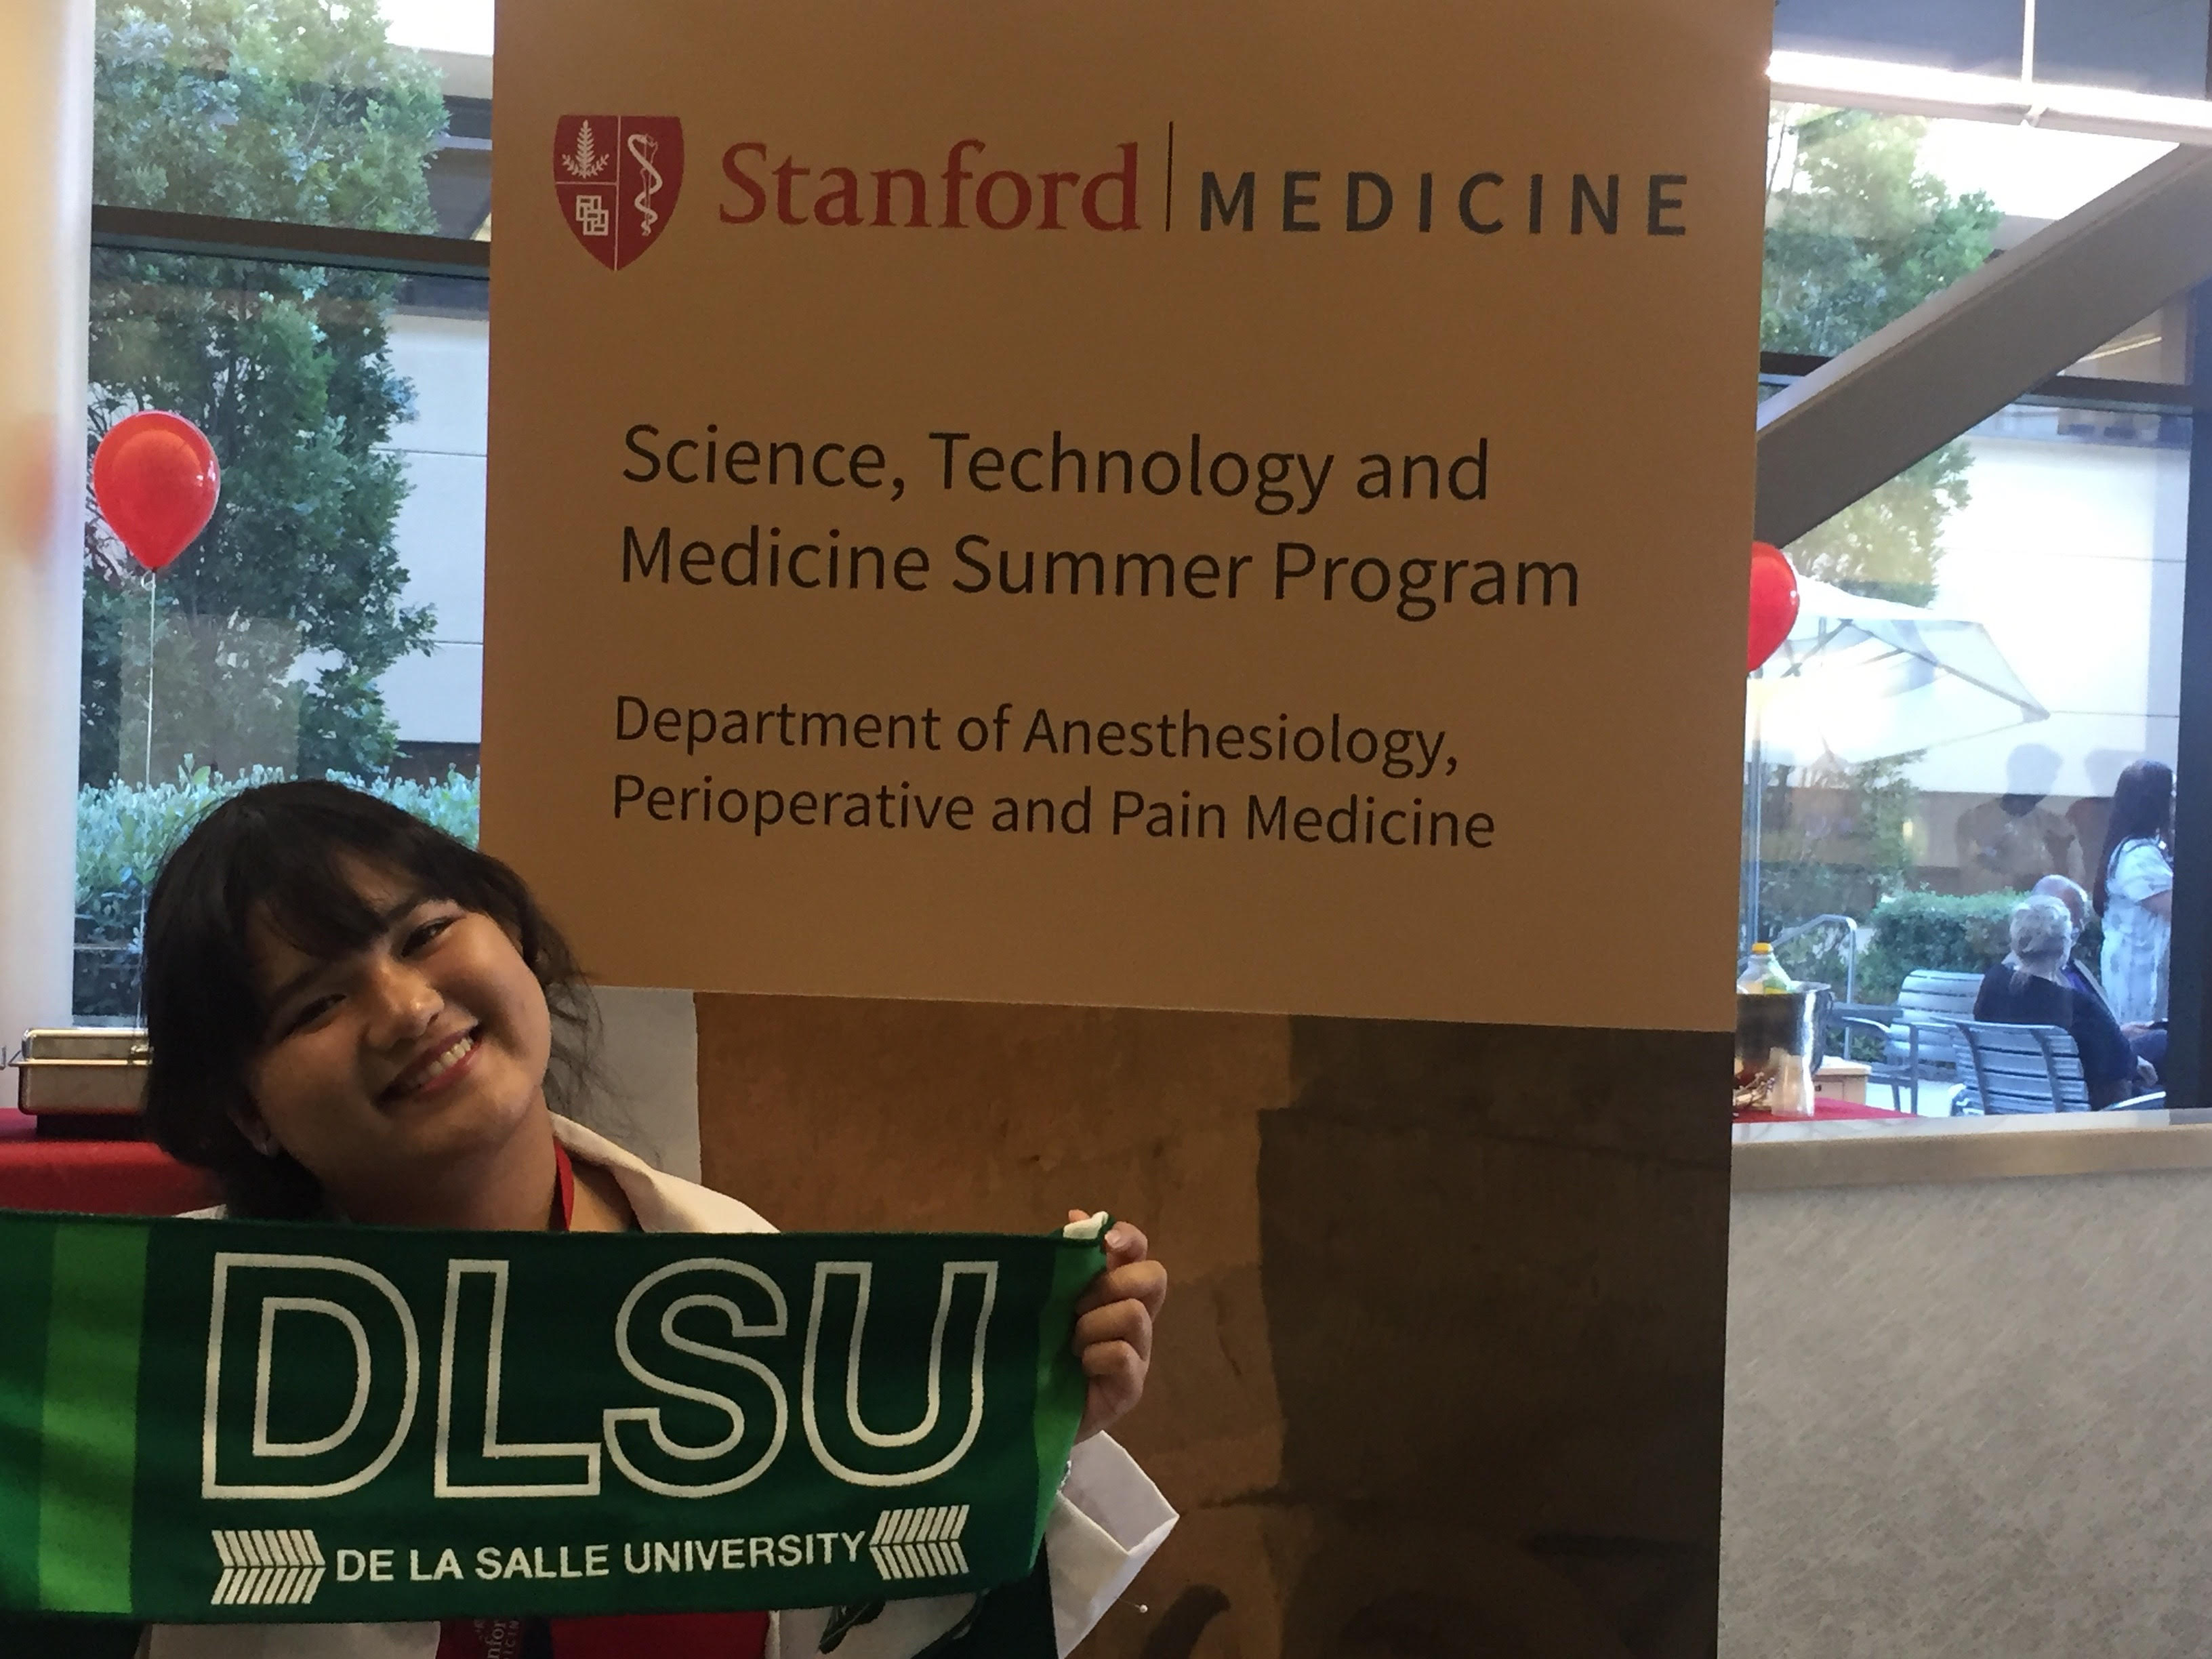 FILIPINO MAKES IT TO STANFORD SUMMER PROGRAM–AMONG 1,000 APPLICANTS